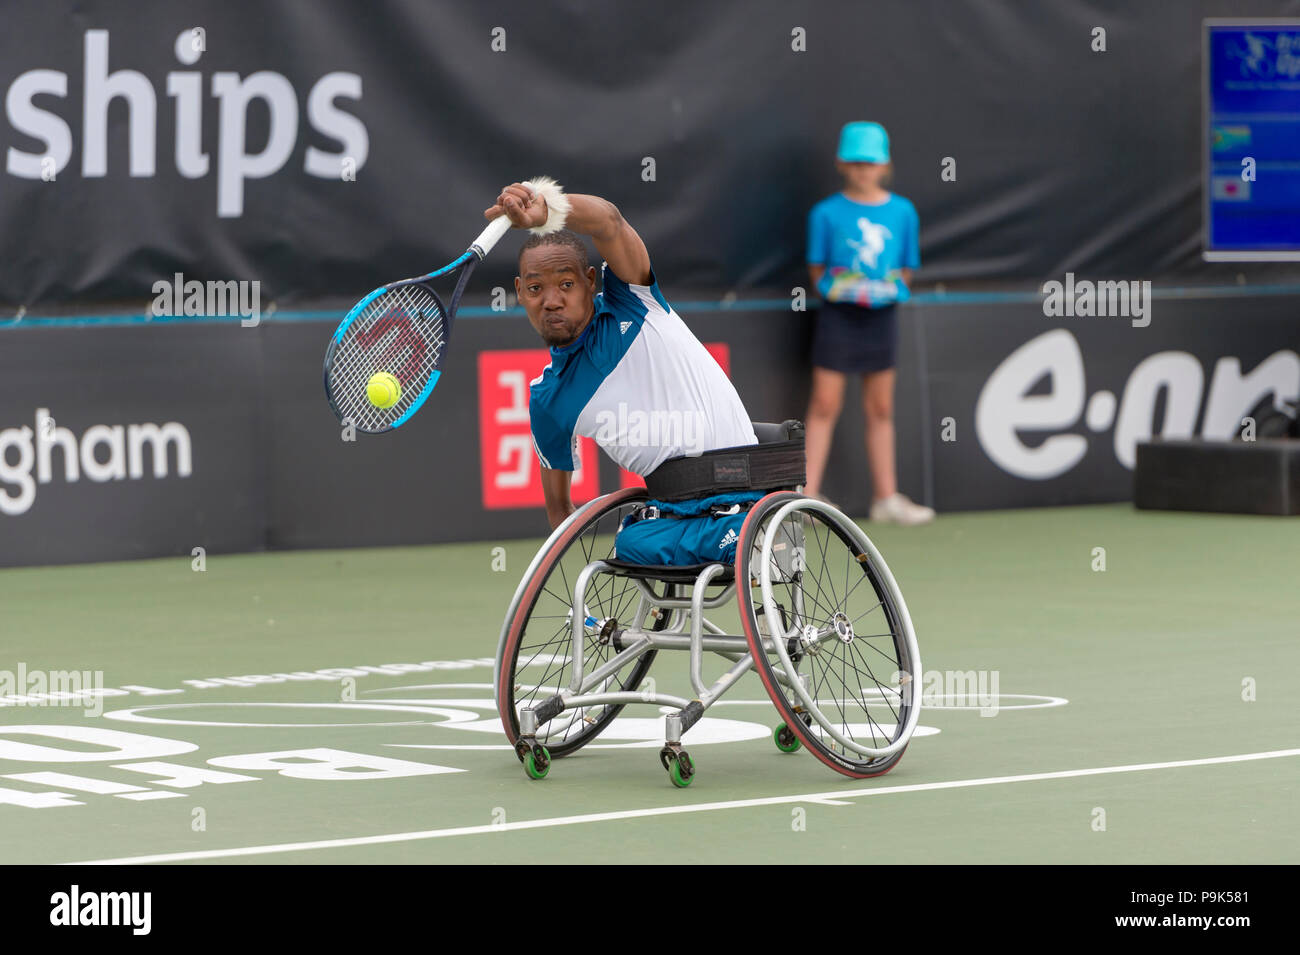 Lucas Sithole in Action in the quad division at the Nottingham tennis centre in the British Open of the Wheelchair Tennis Championships July 2018 Stock Photo